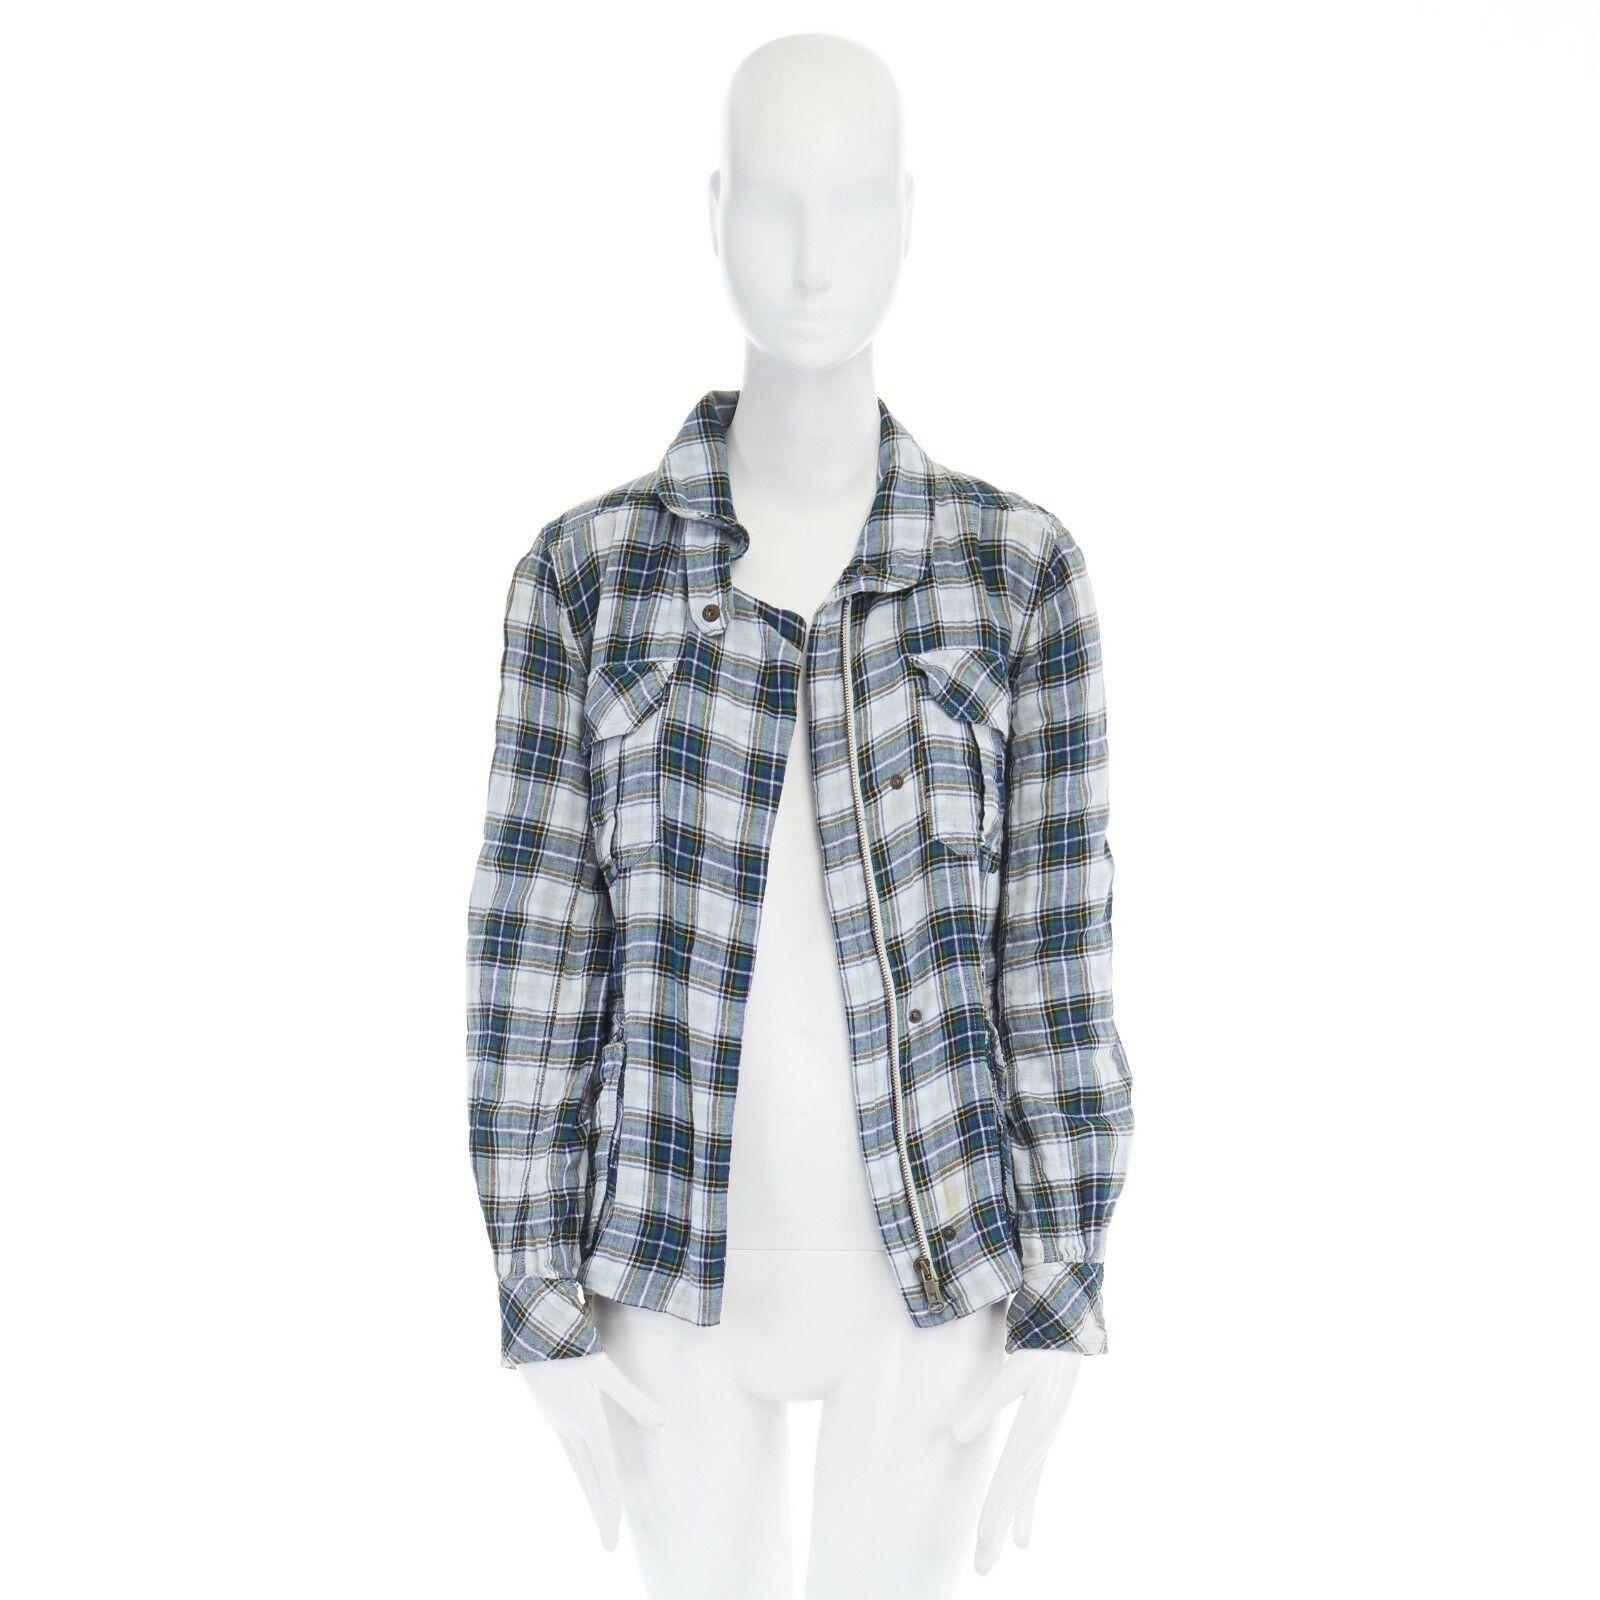 ISABEL MARANT ETOILE blue green checker cotton zip front shirt jacket US0 XS 
Reference: YNWG/A00025 
Brand: Isabel Marant 
Designer: Isabel Marant 
Material: Cotton 
Color: Green 
Pattern: Check 
Closure: Zip 
Extra Detail: Cotton, elastane. Green